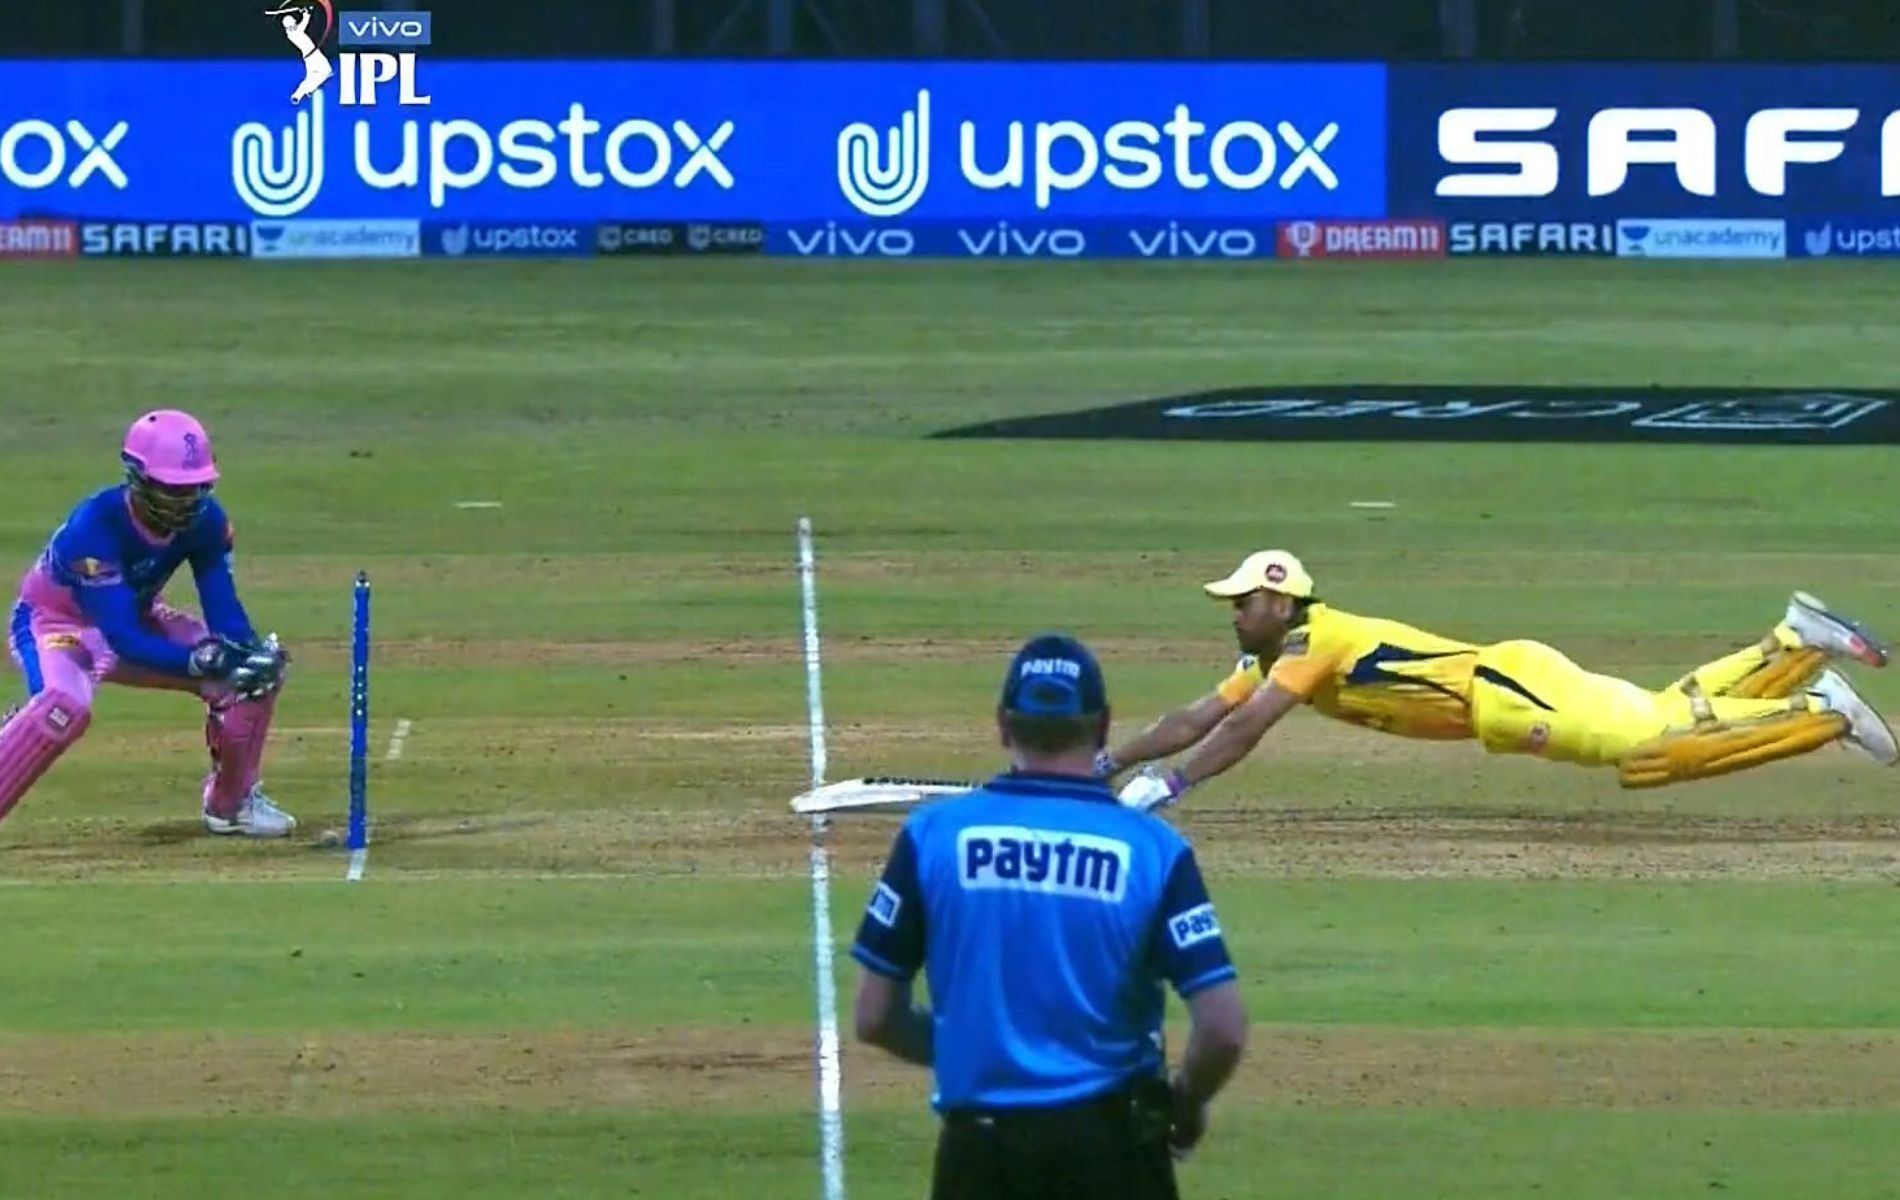 MS Dhoni dives to save his wicket. (Pic: Twitter)